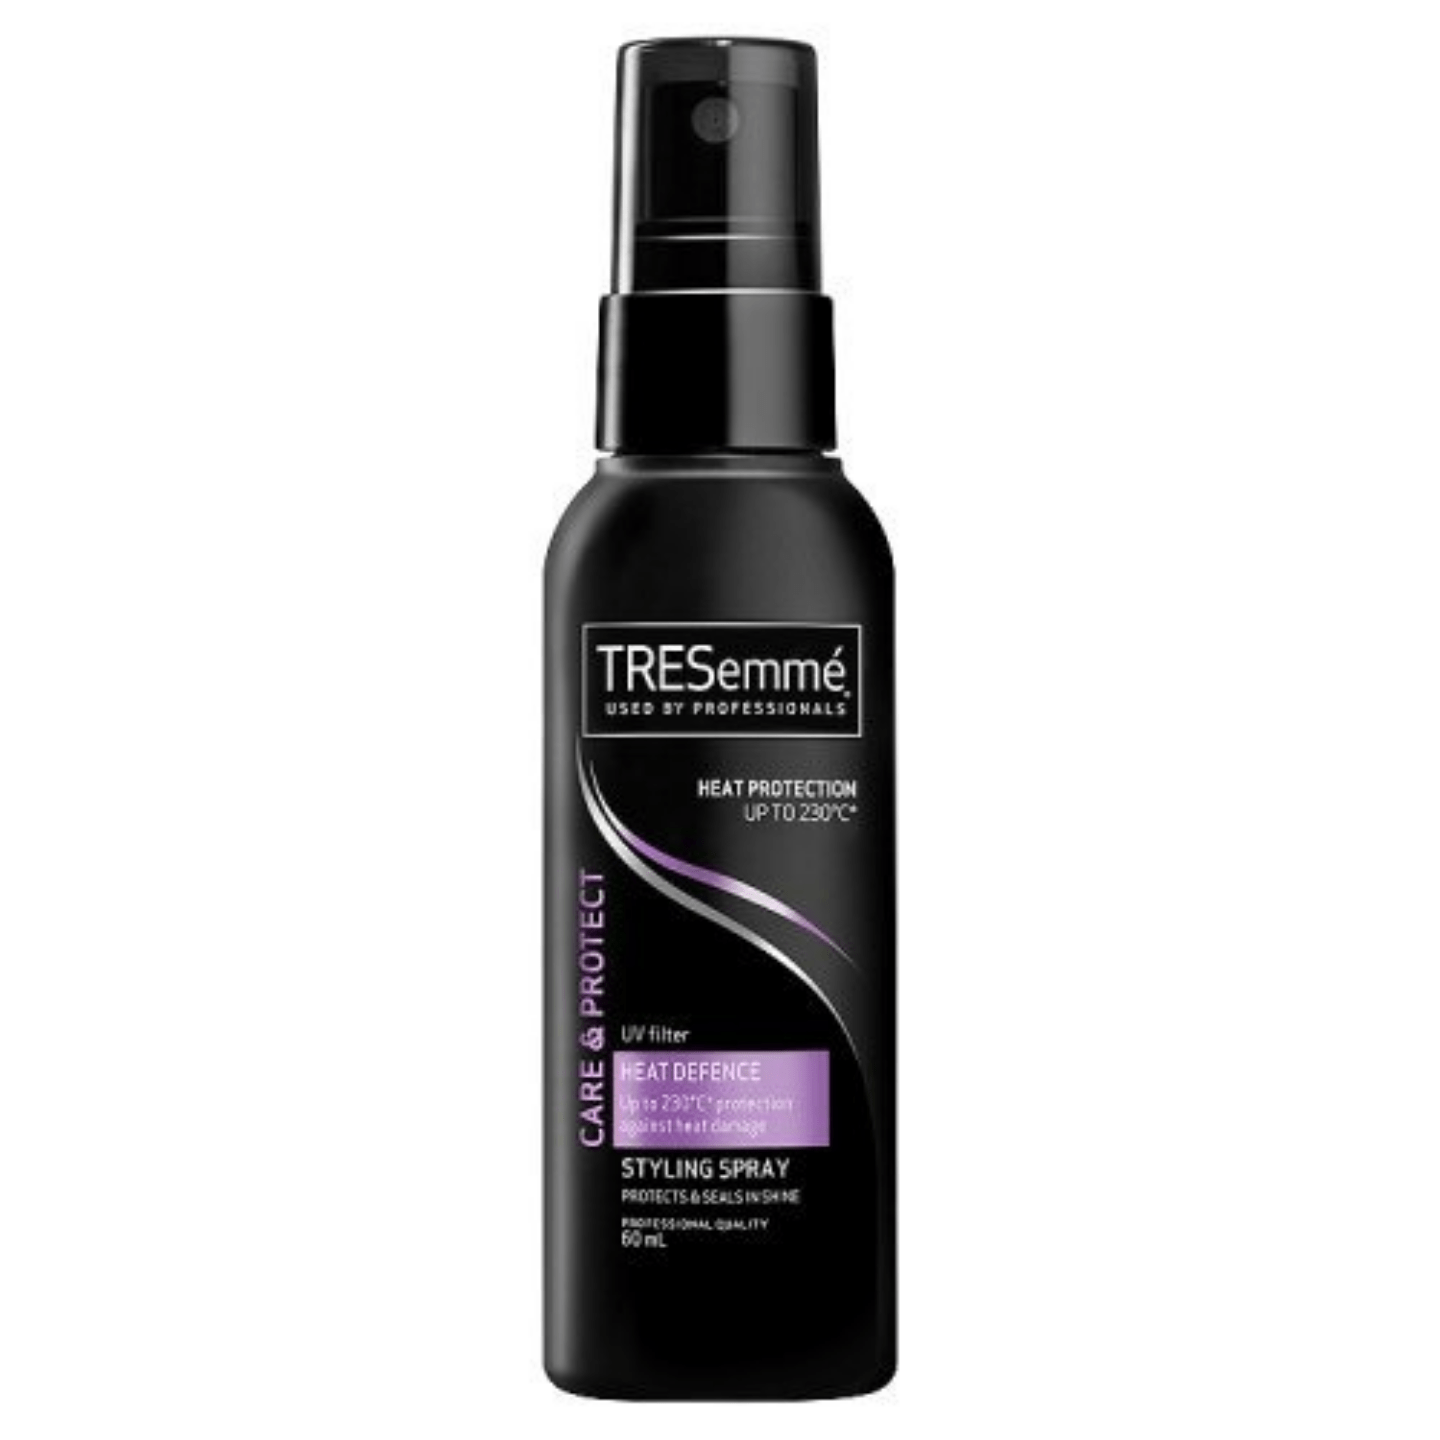 TRESemme Protect Heat Defence Styling Spray 60ml